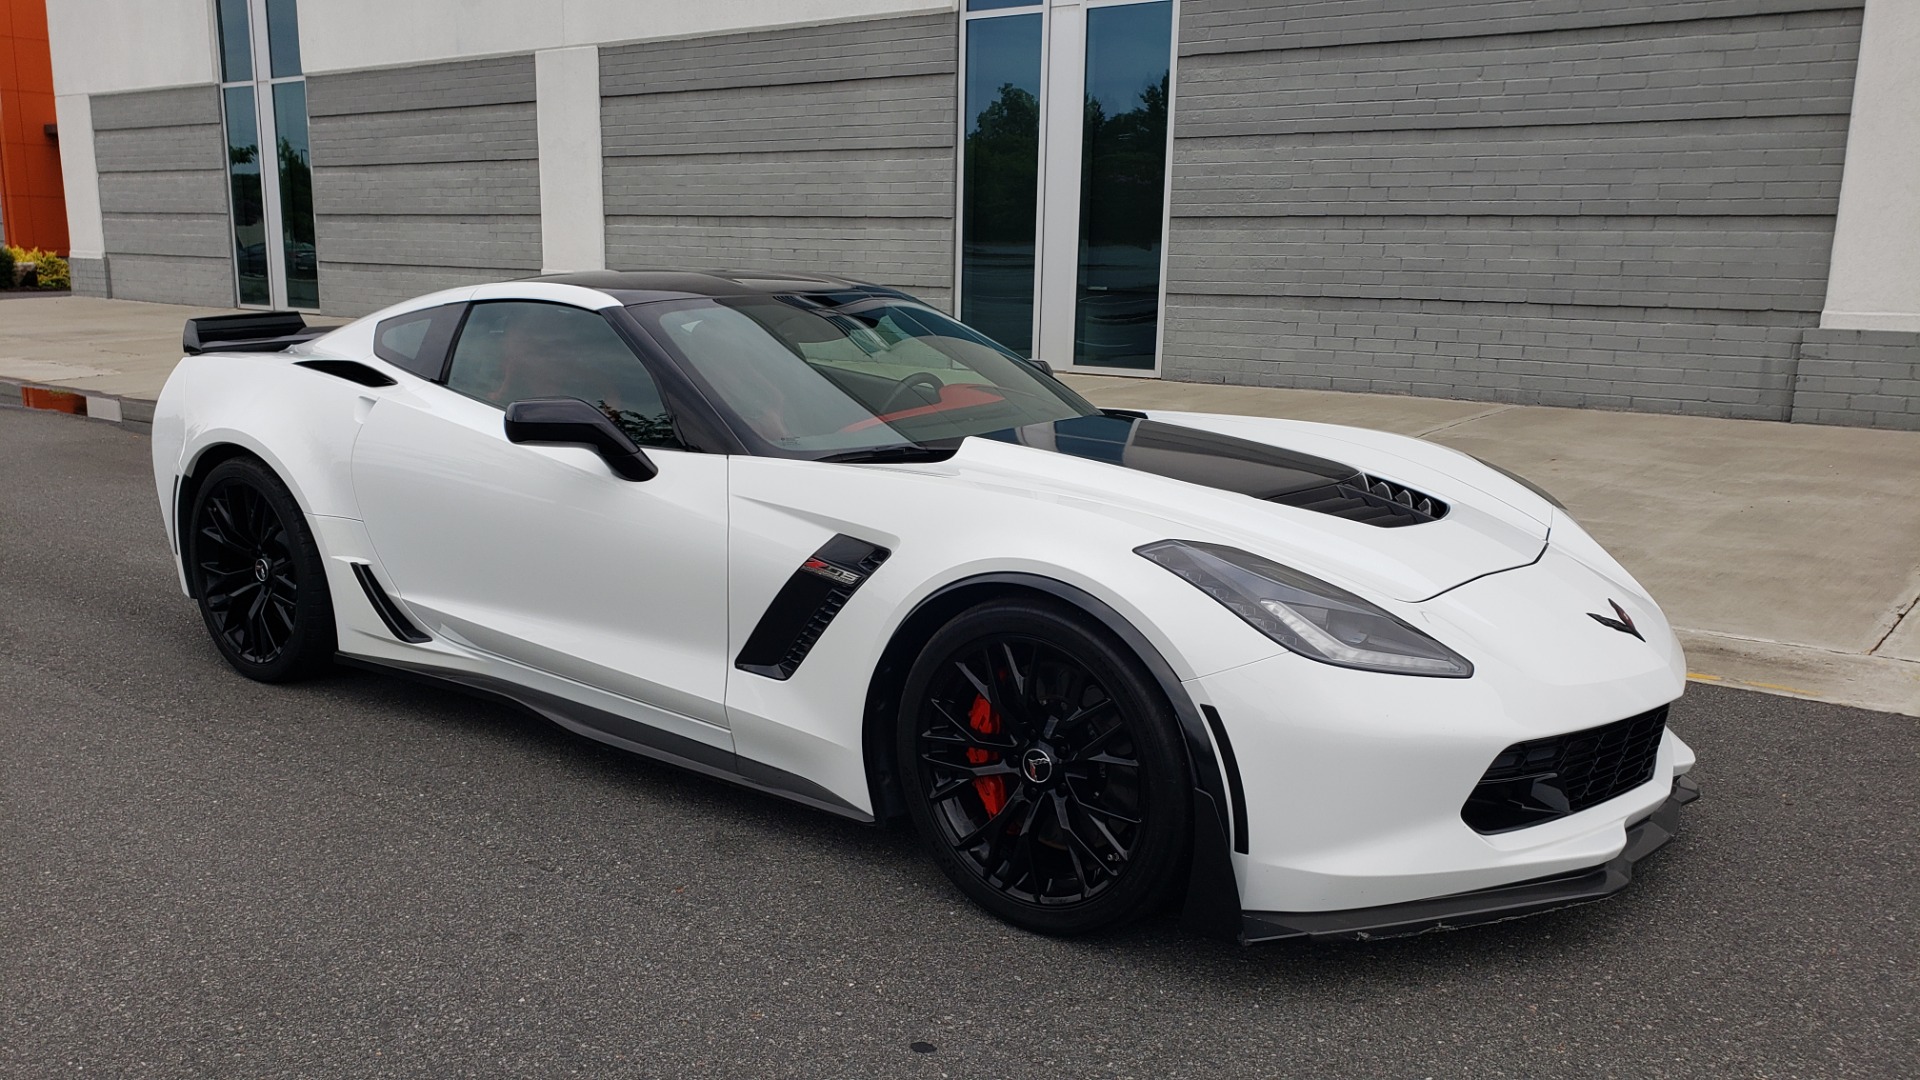 Used 2015 Chevrolet CORVETTE C7 Z06 3LZ COUPE / NAV / COMP STS / CF ROOF / REMOTE START / REARVIEW for sale Sold at Formula Imports in Charlotte NC 28227 11